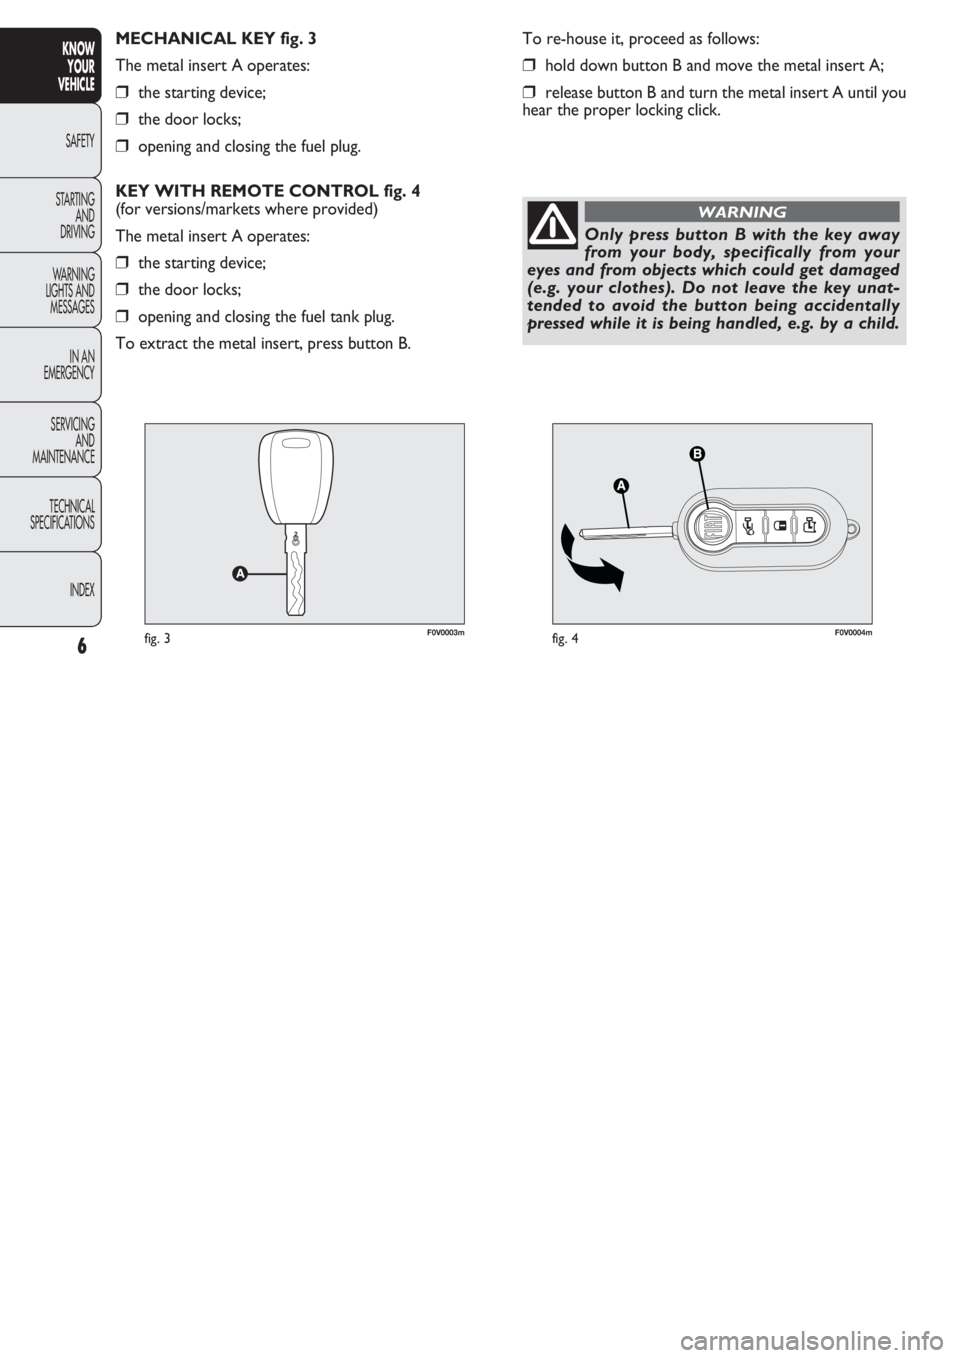 FIAT DOBLO COMBI 2011  Owner handbook (in English) F0V0003mfig. 3F0V0004mfig. 4
To re-house it, proceed as follows:
❒hold down button B and move the metal insert A;
❒release button B and turn the metal insert A until you
hear the proper locking cl